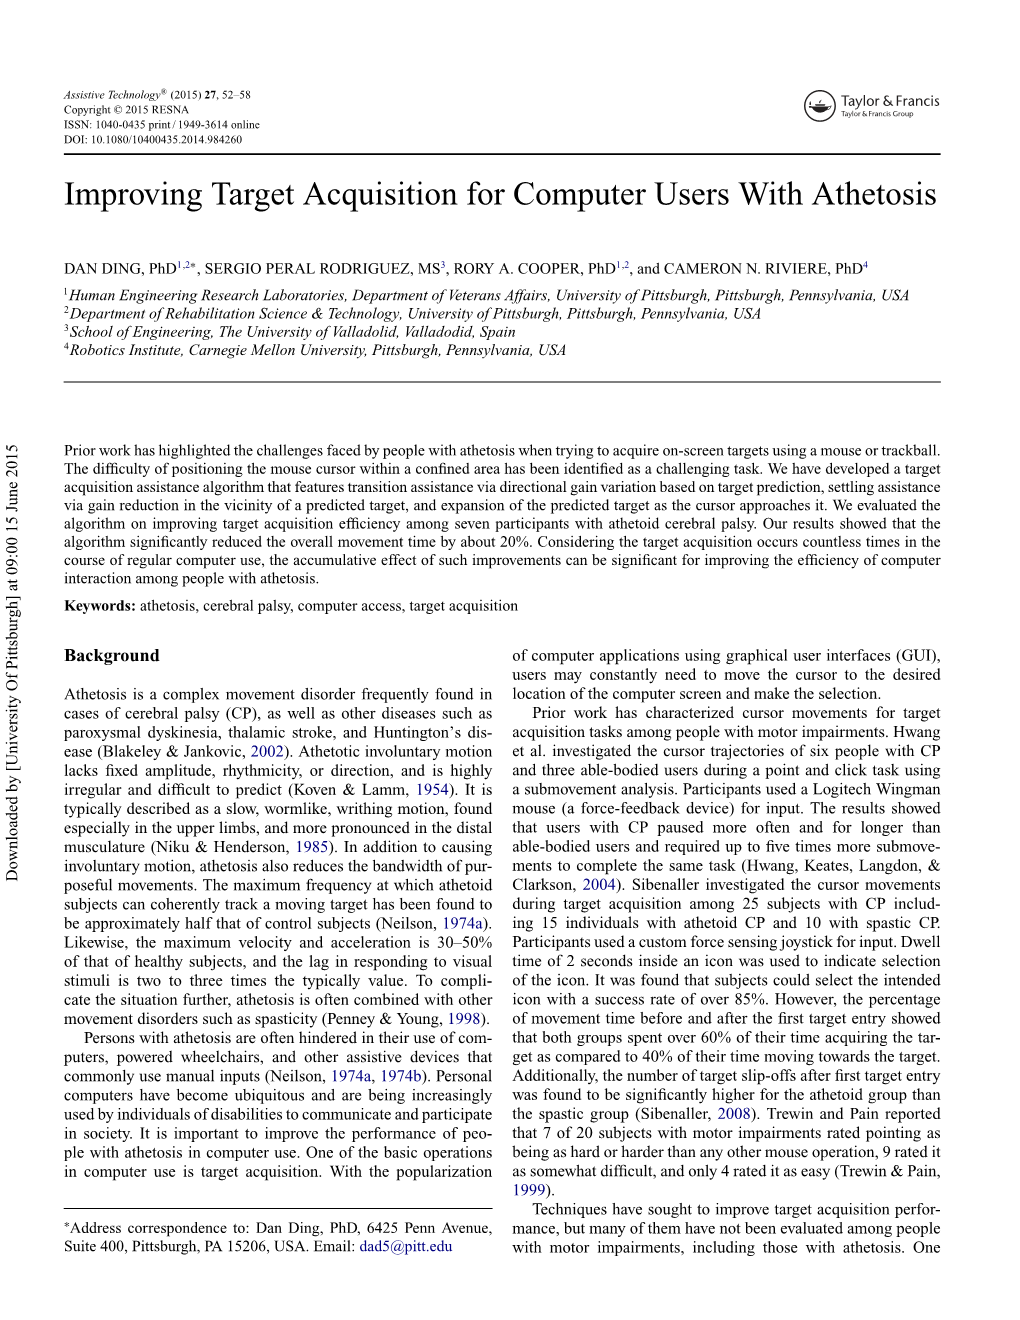 Improving Target Acquisition for Computer Users with Athetosis